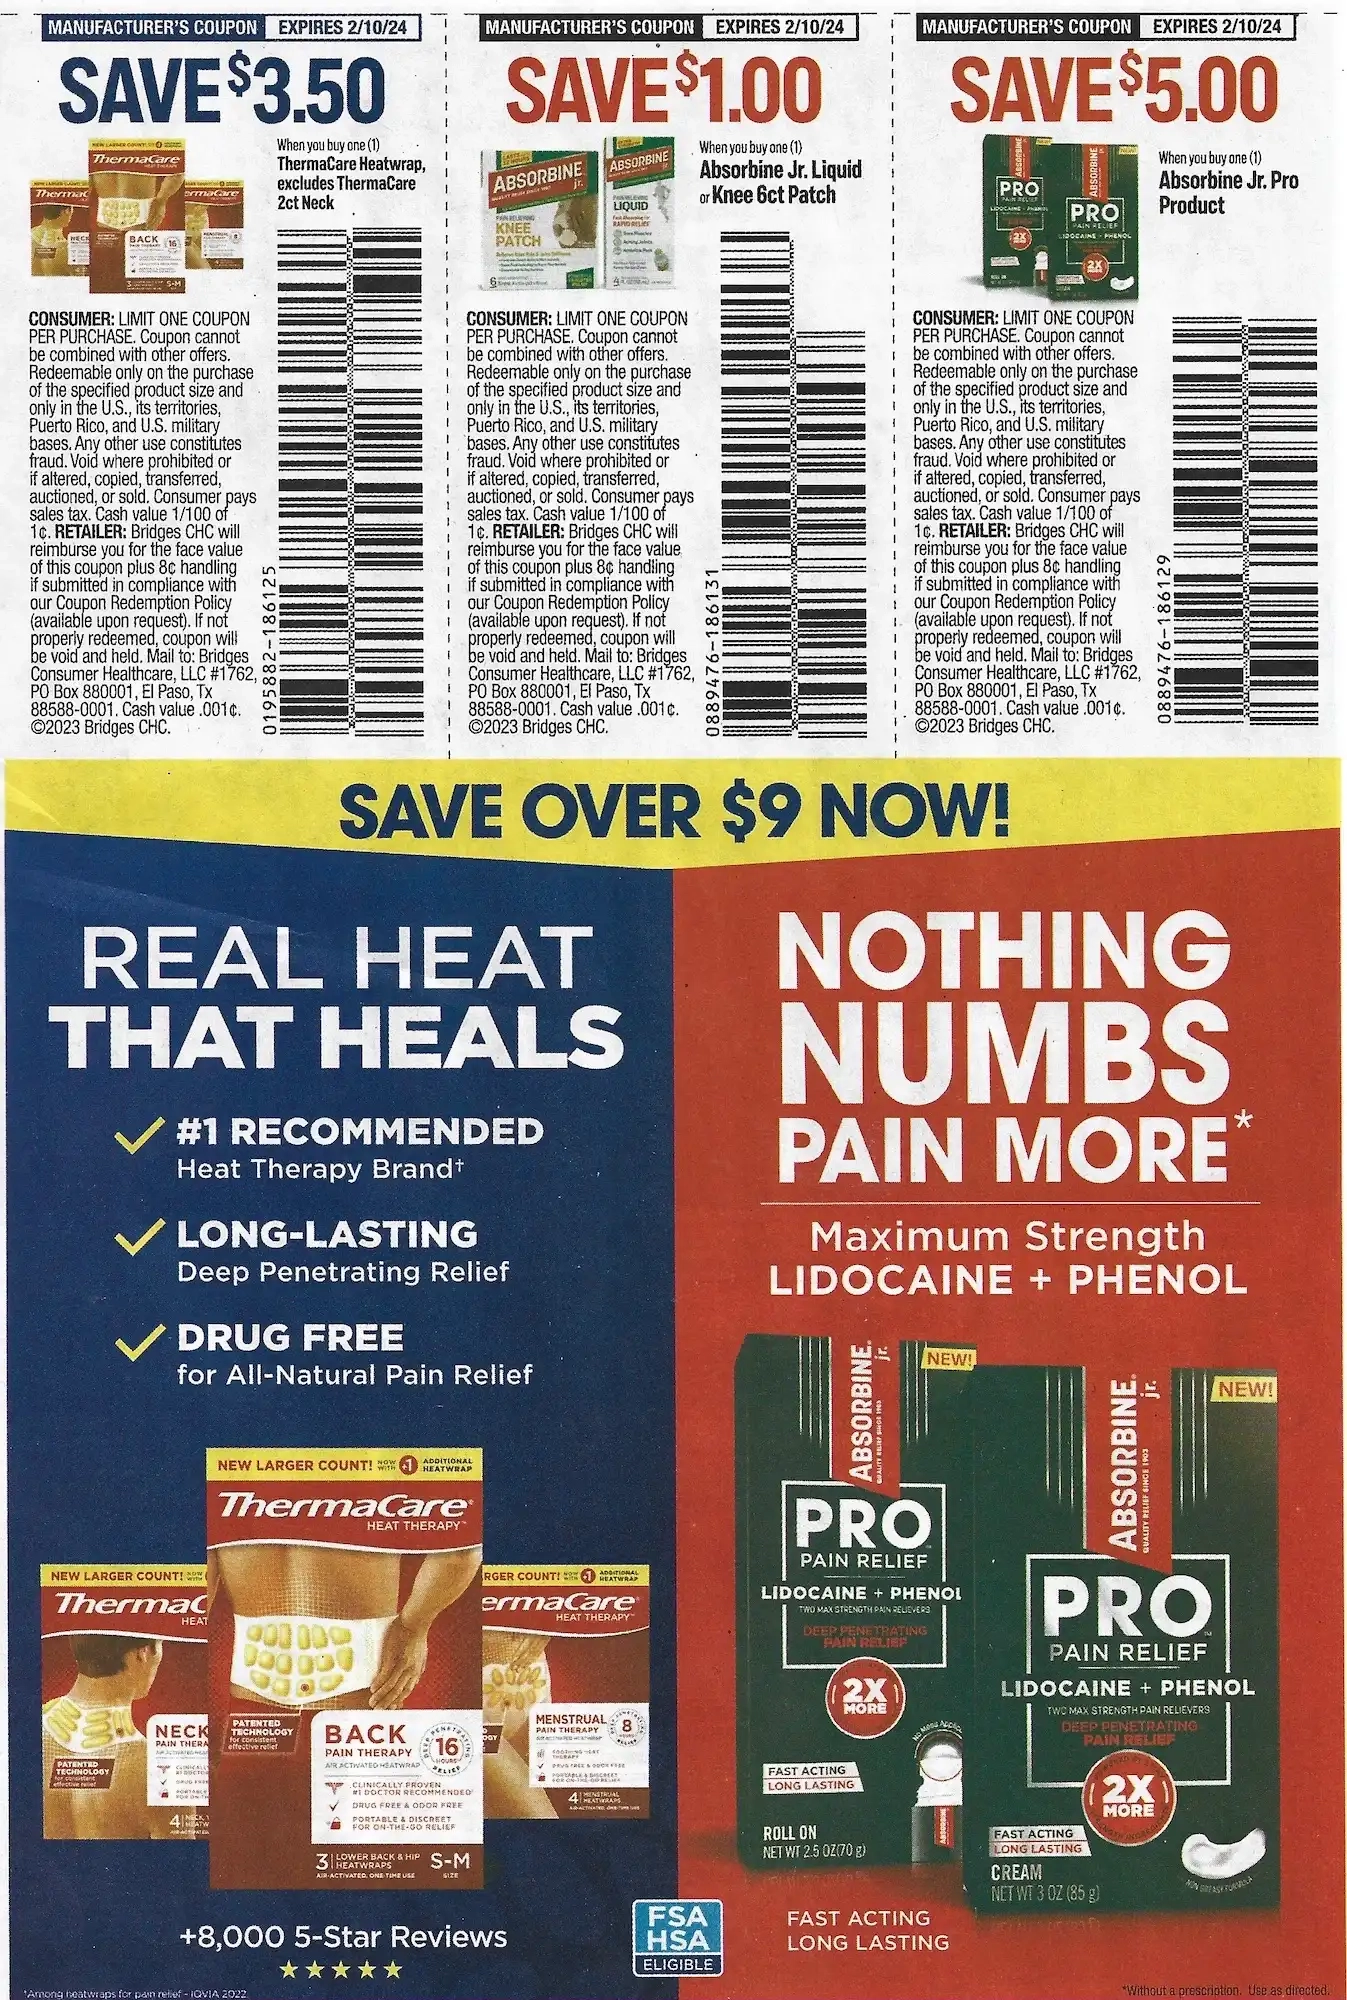 Save.Com Weekly Mailer Coupons - 01/07/2024 Thermacare Lidocaine Absorbine